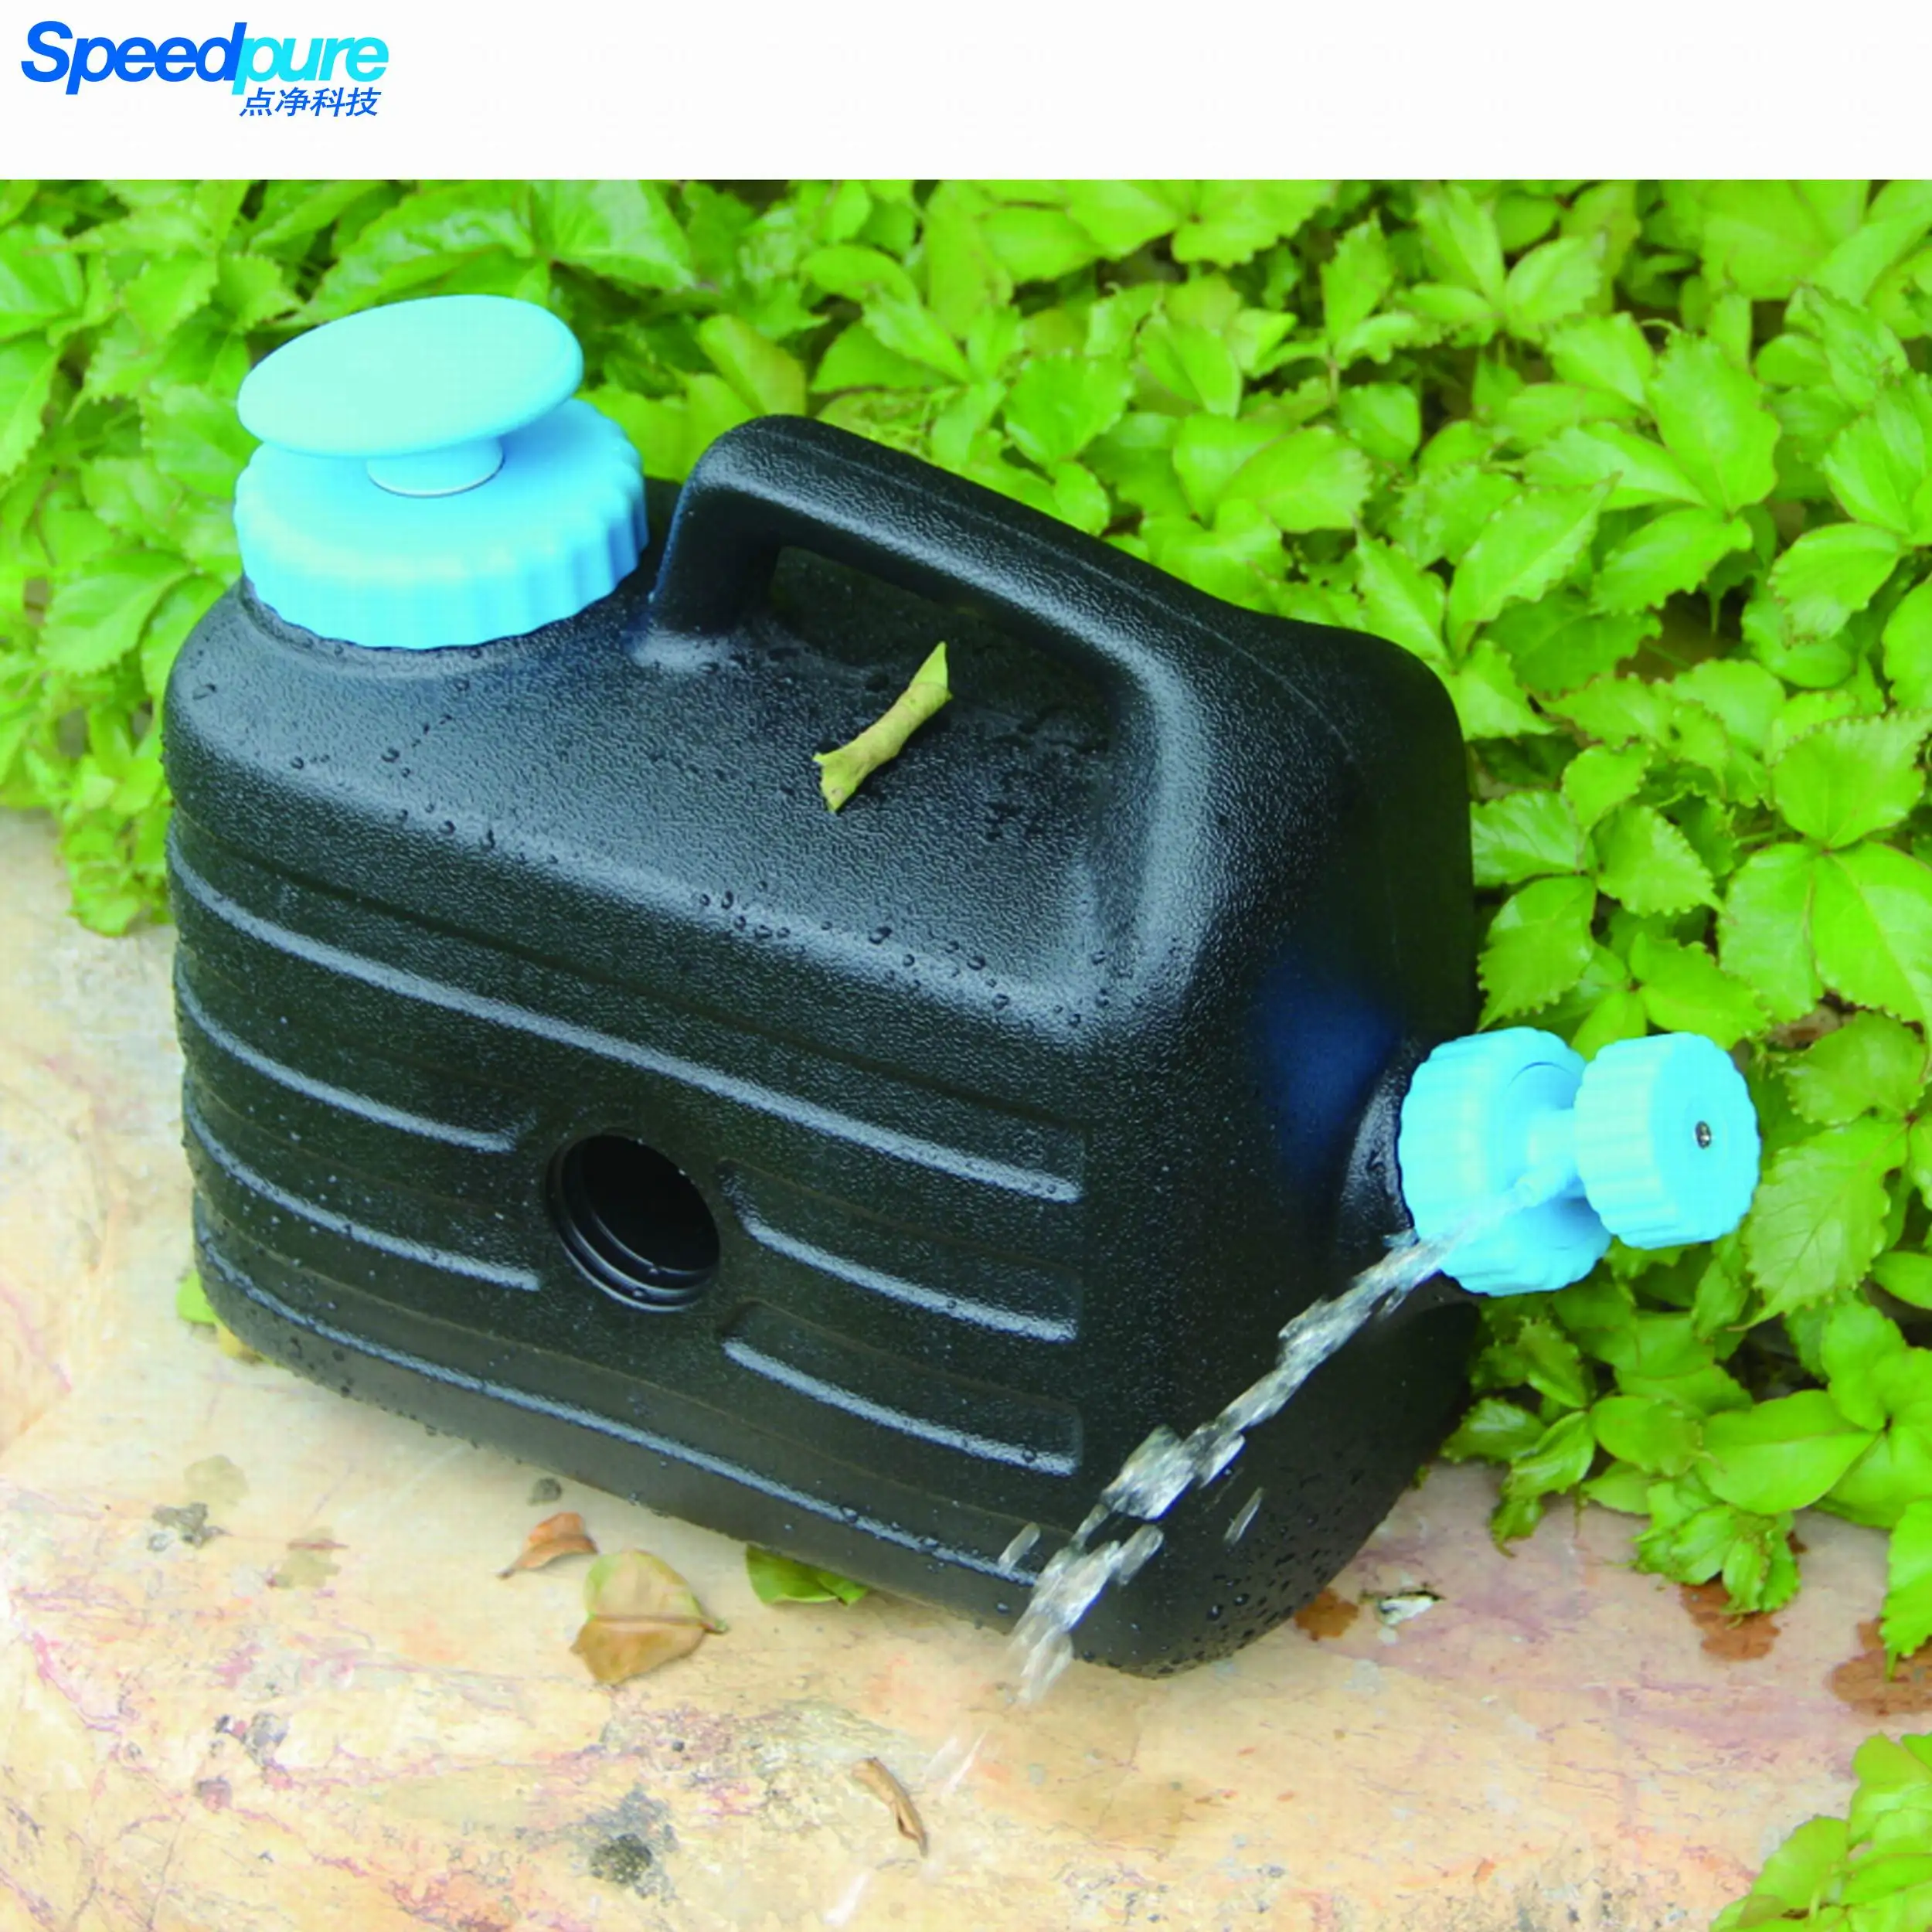 
10L Camping Water Filter Tank, Portable Jerrycan for Hiking and RV 